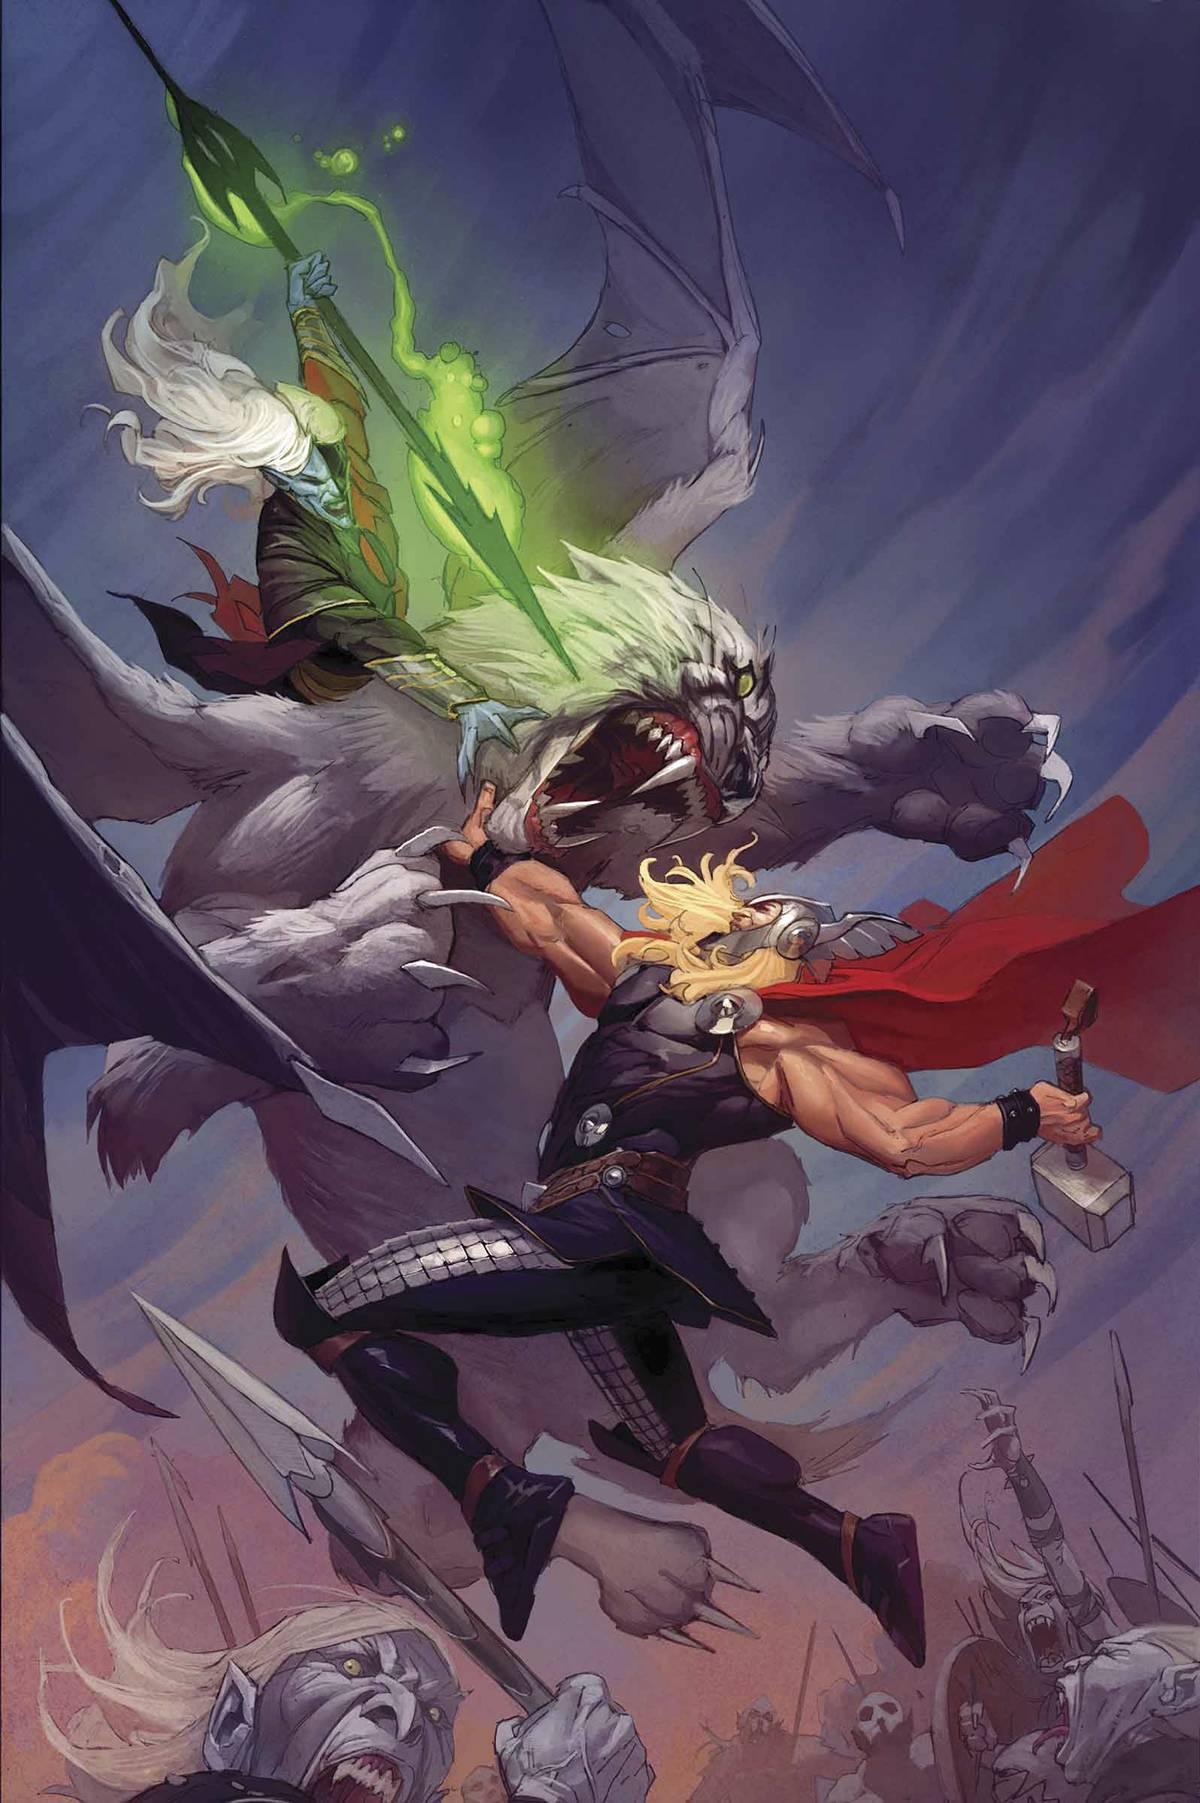 THOR BY GARNEY POSTER - Kings Comics